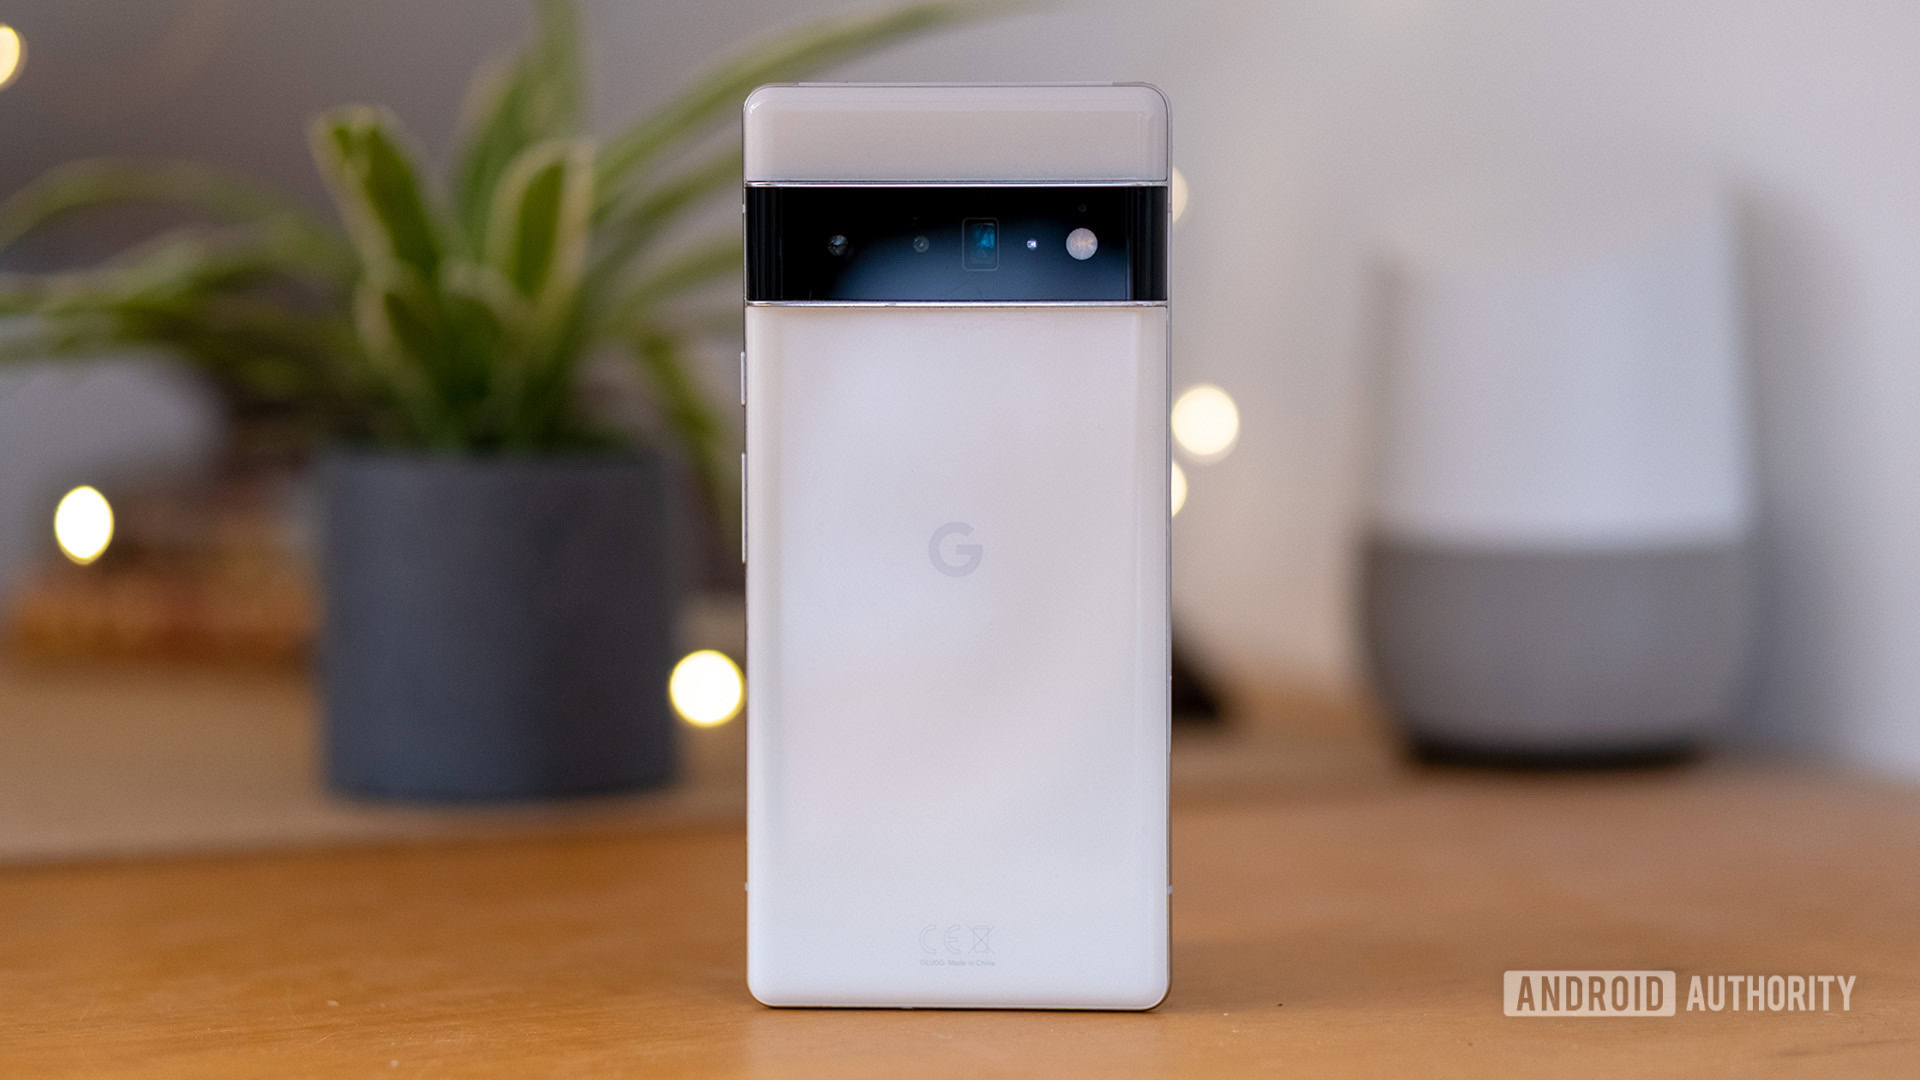 Got a Pixel 6 series device? You may not want to factory reset it